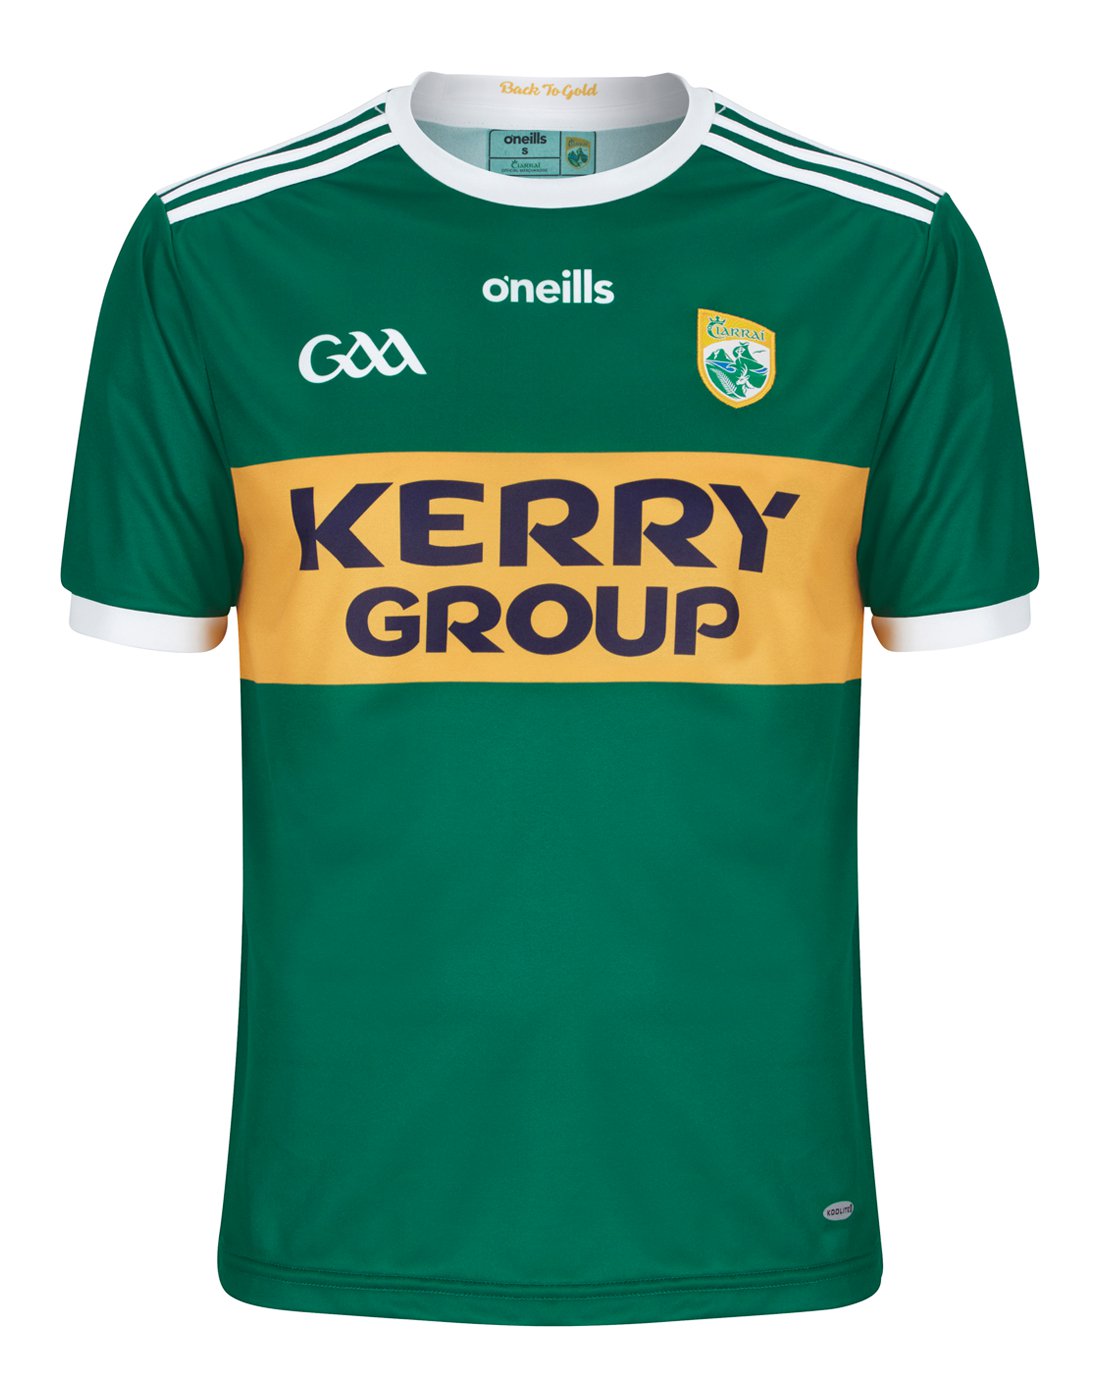 new kerry jersey